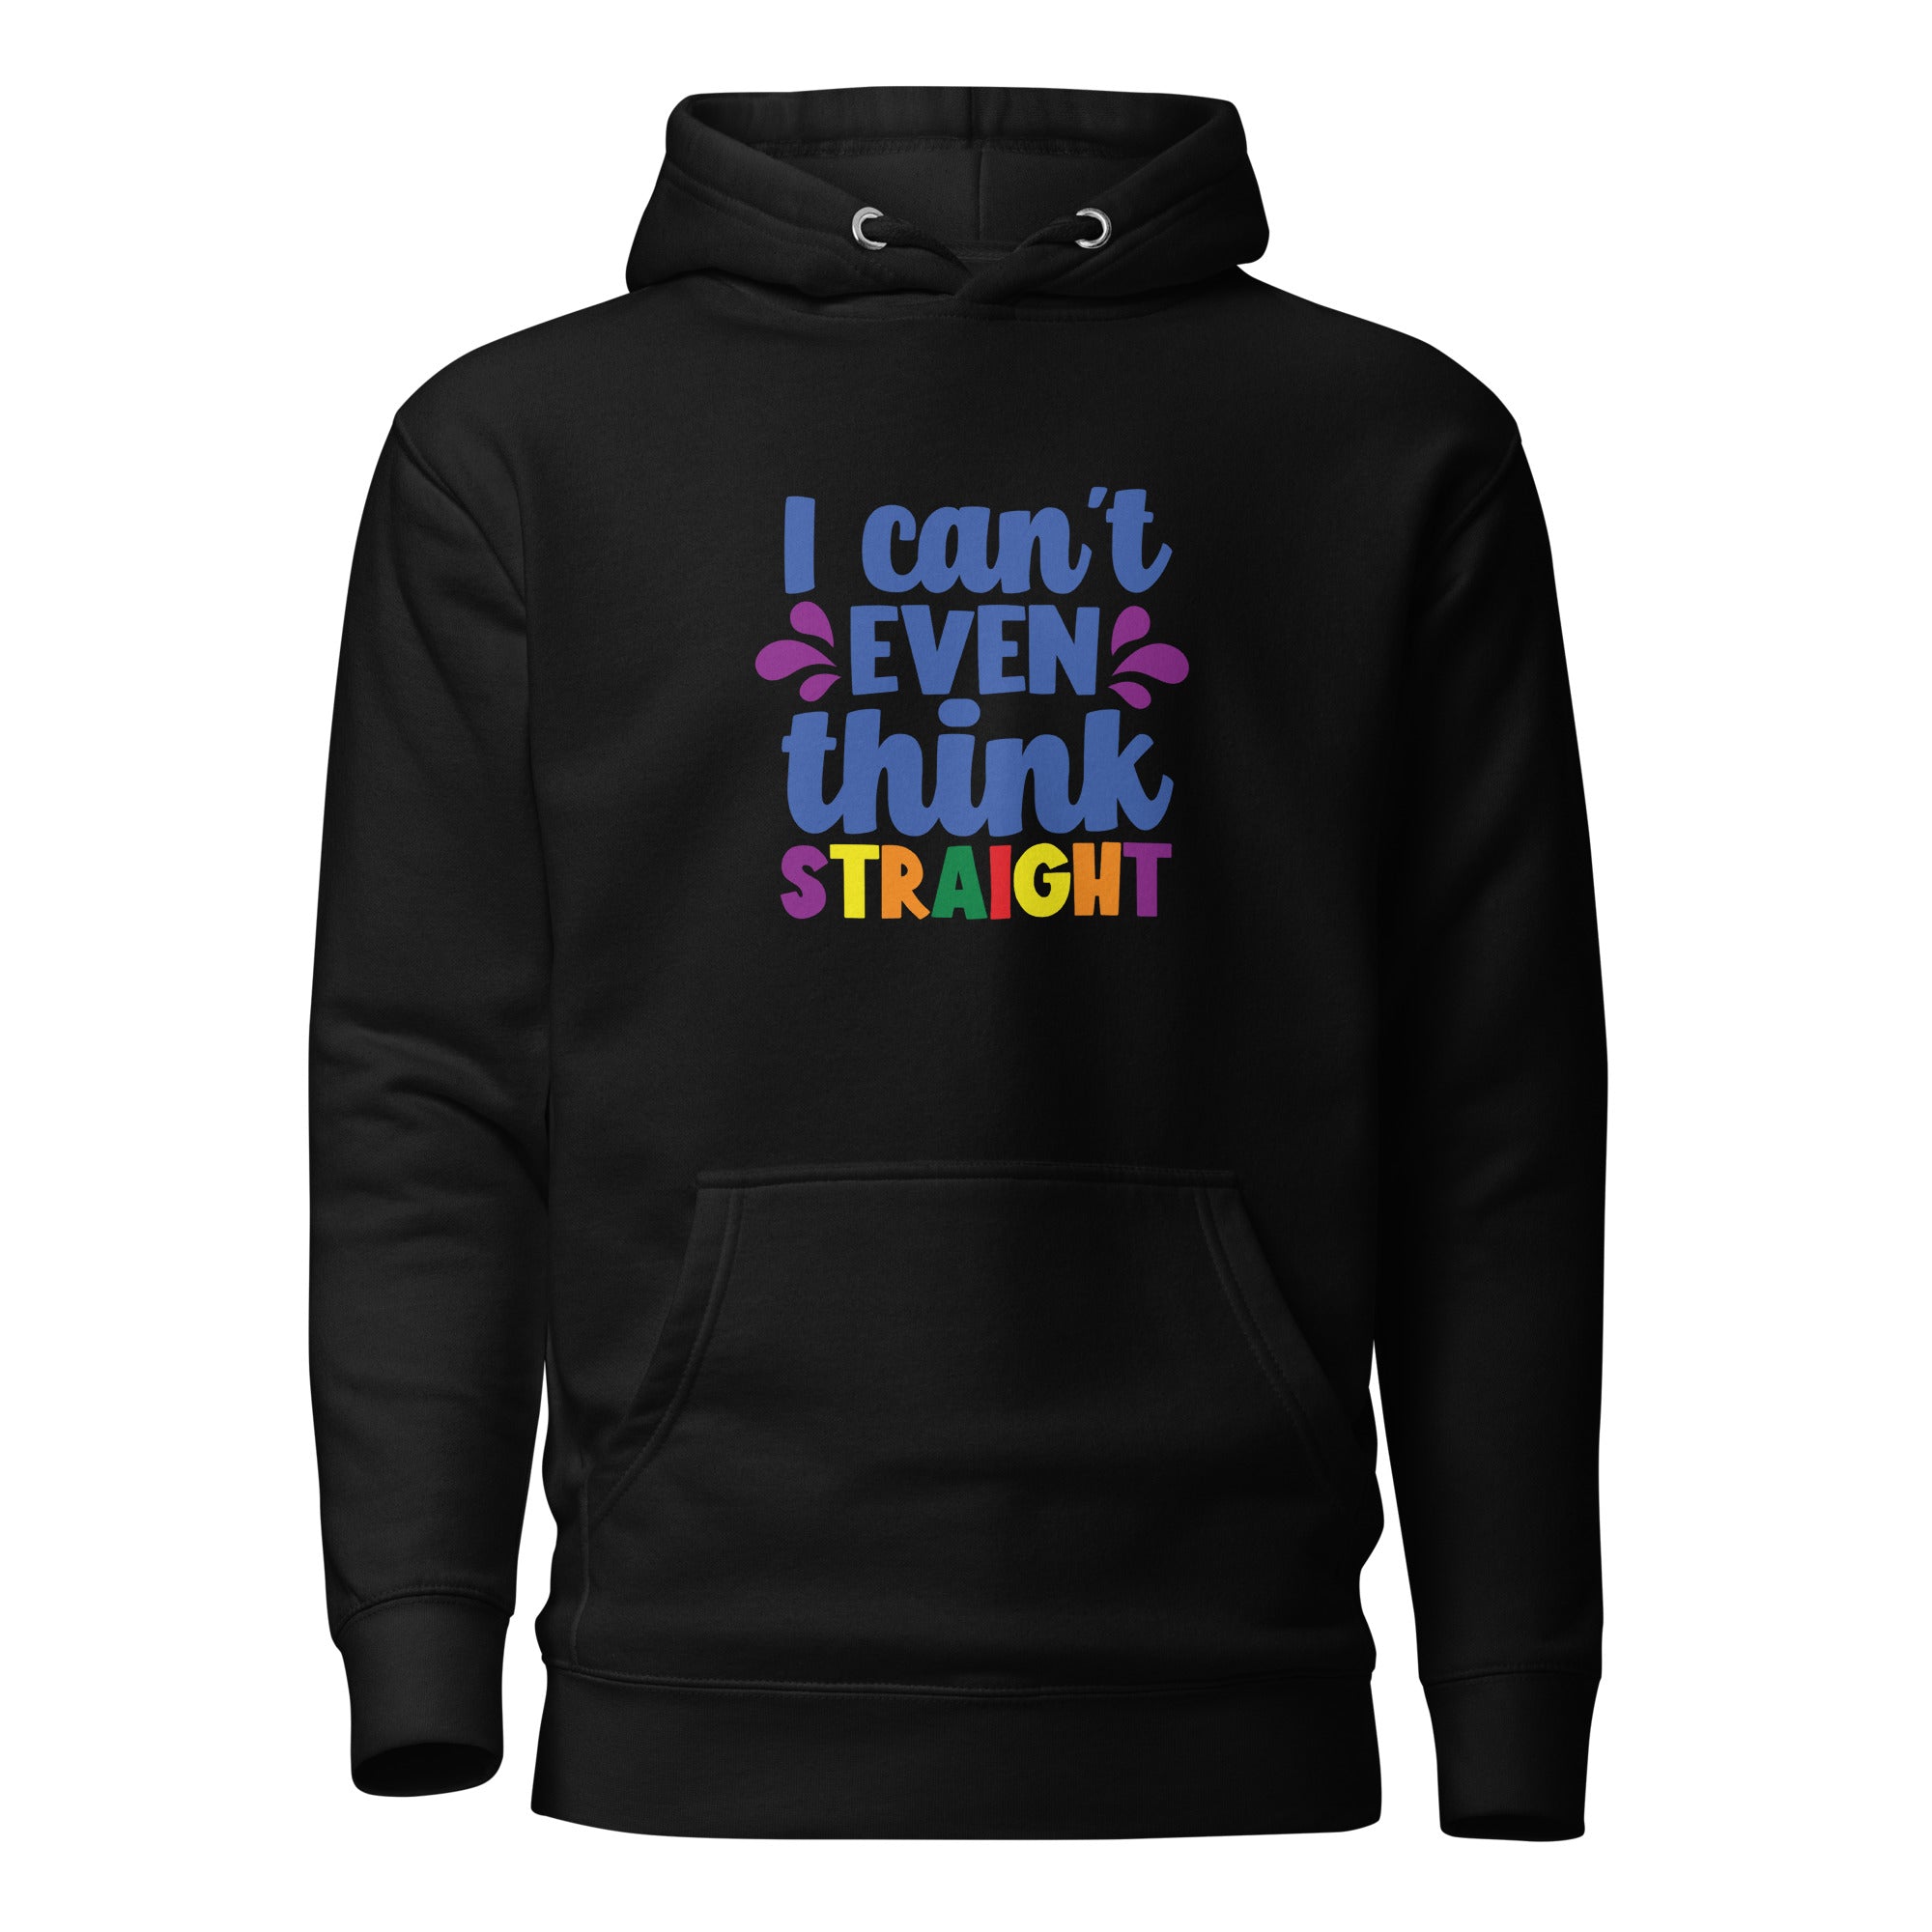 Unisex Hoodie- I can't even think straight